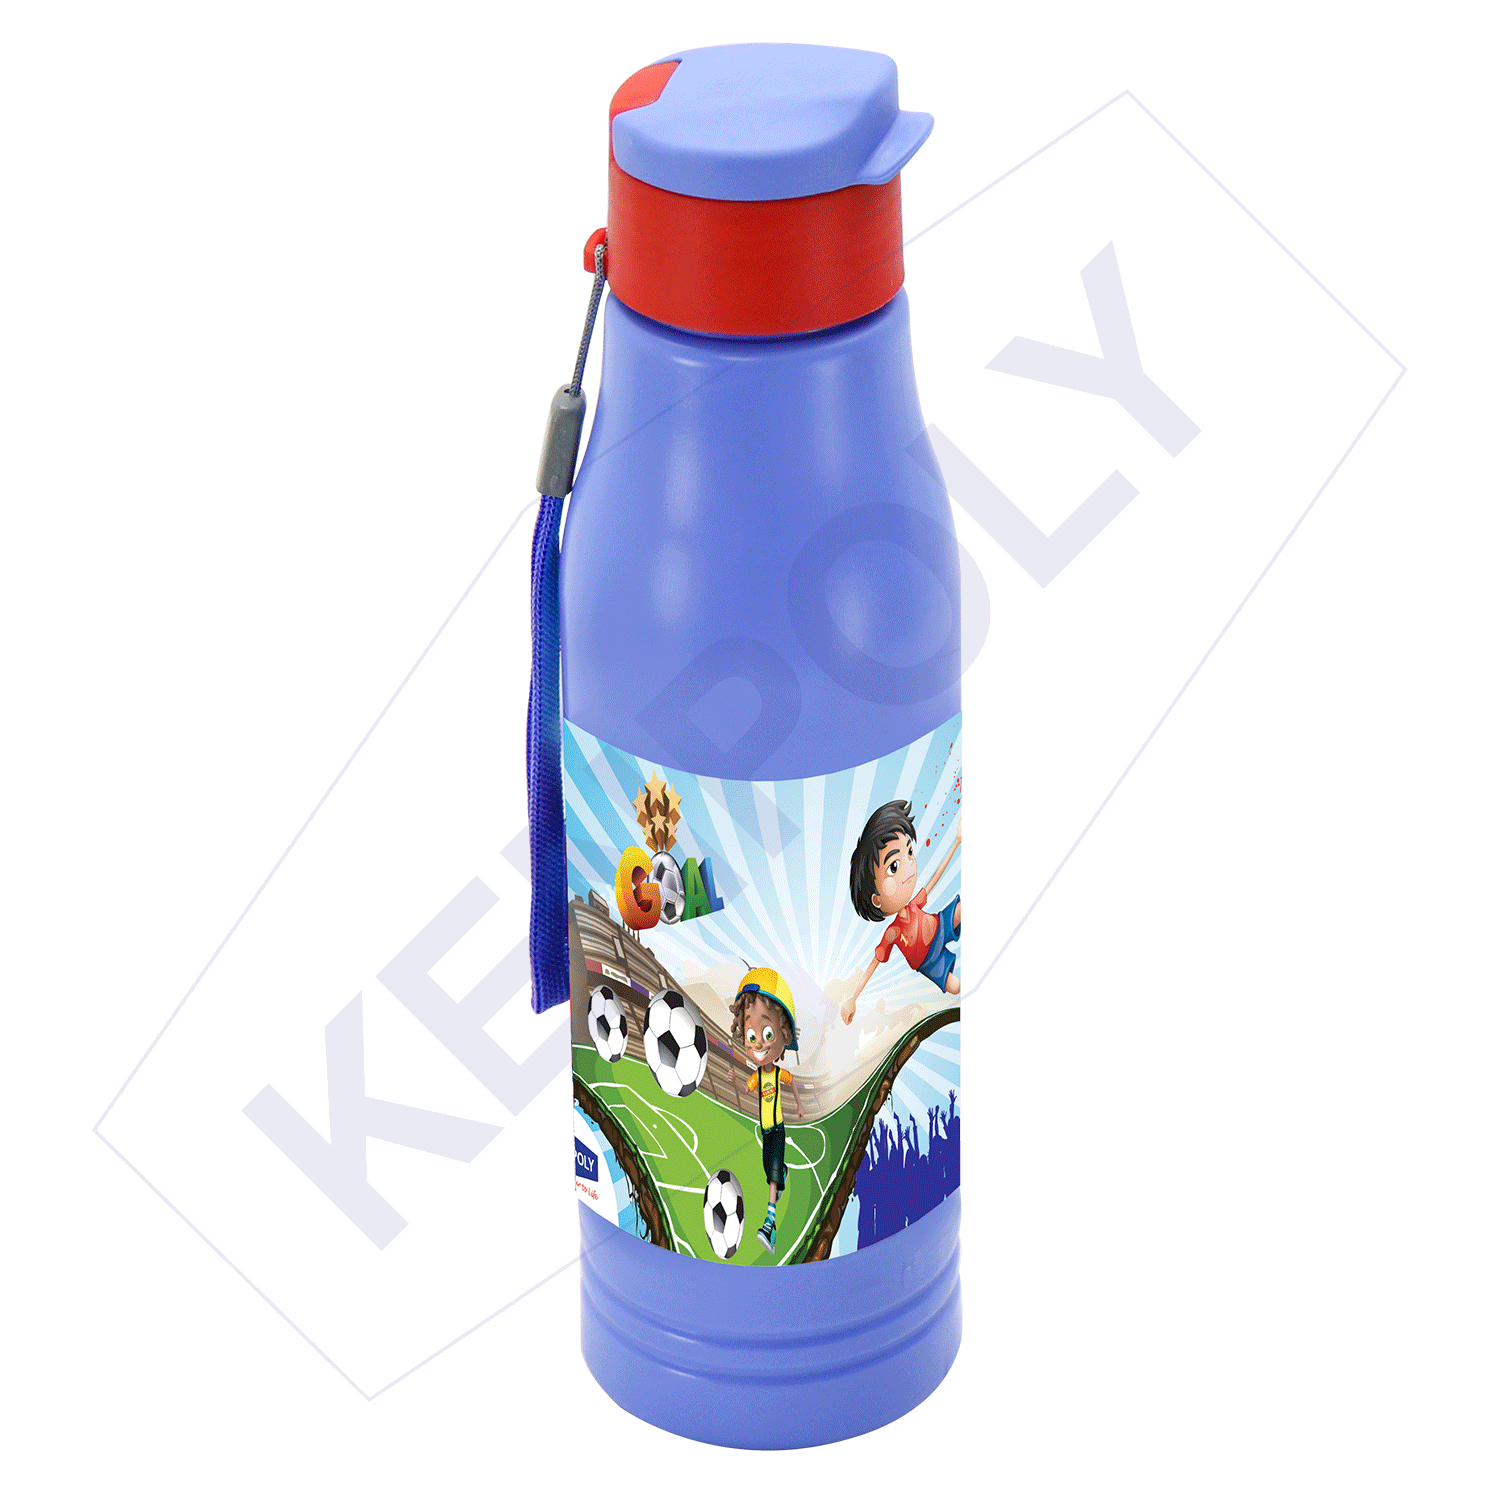 Tiny Tots Containers 200 ml  Kenpoly Manufacturers Limited